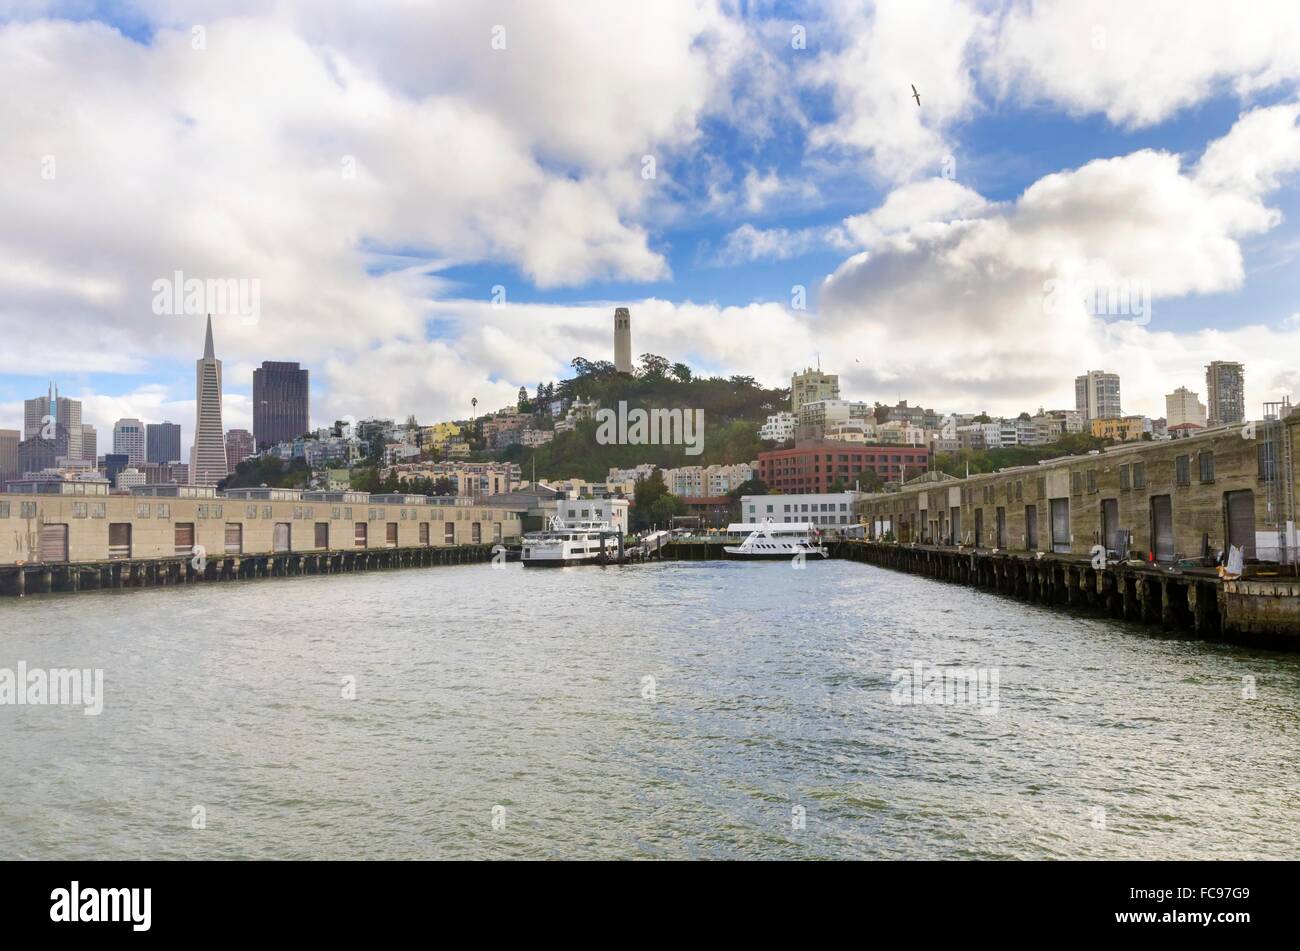 Pier 33 on The Embarcadero at Fisherman's wharf and Coit tower in San Francisco, California, United States. The pier where touri Stock Photo